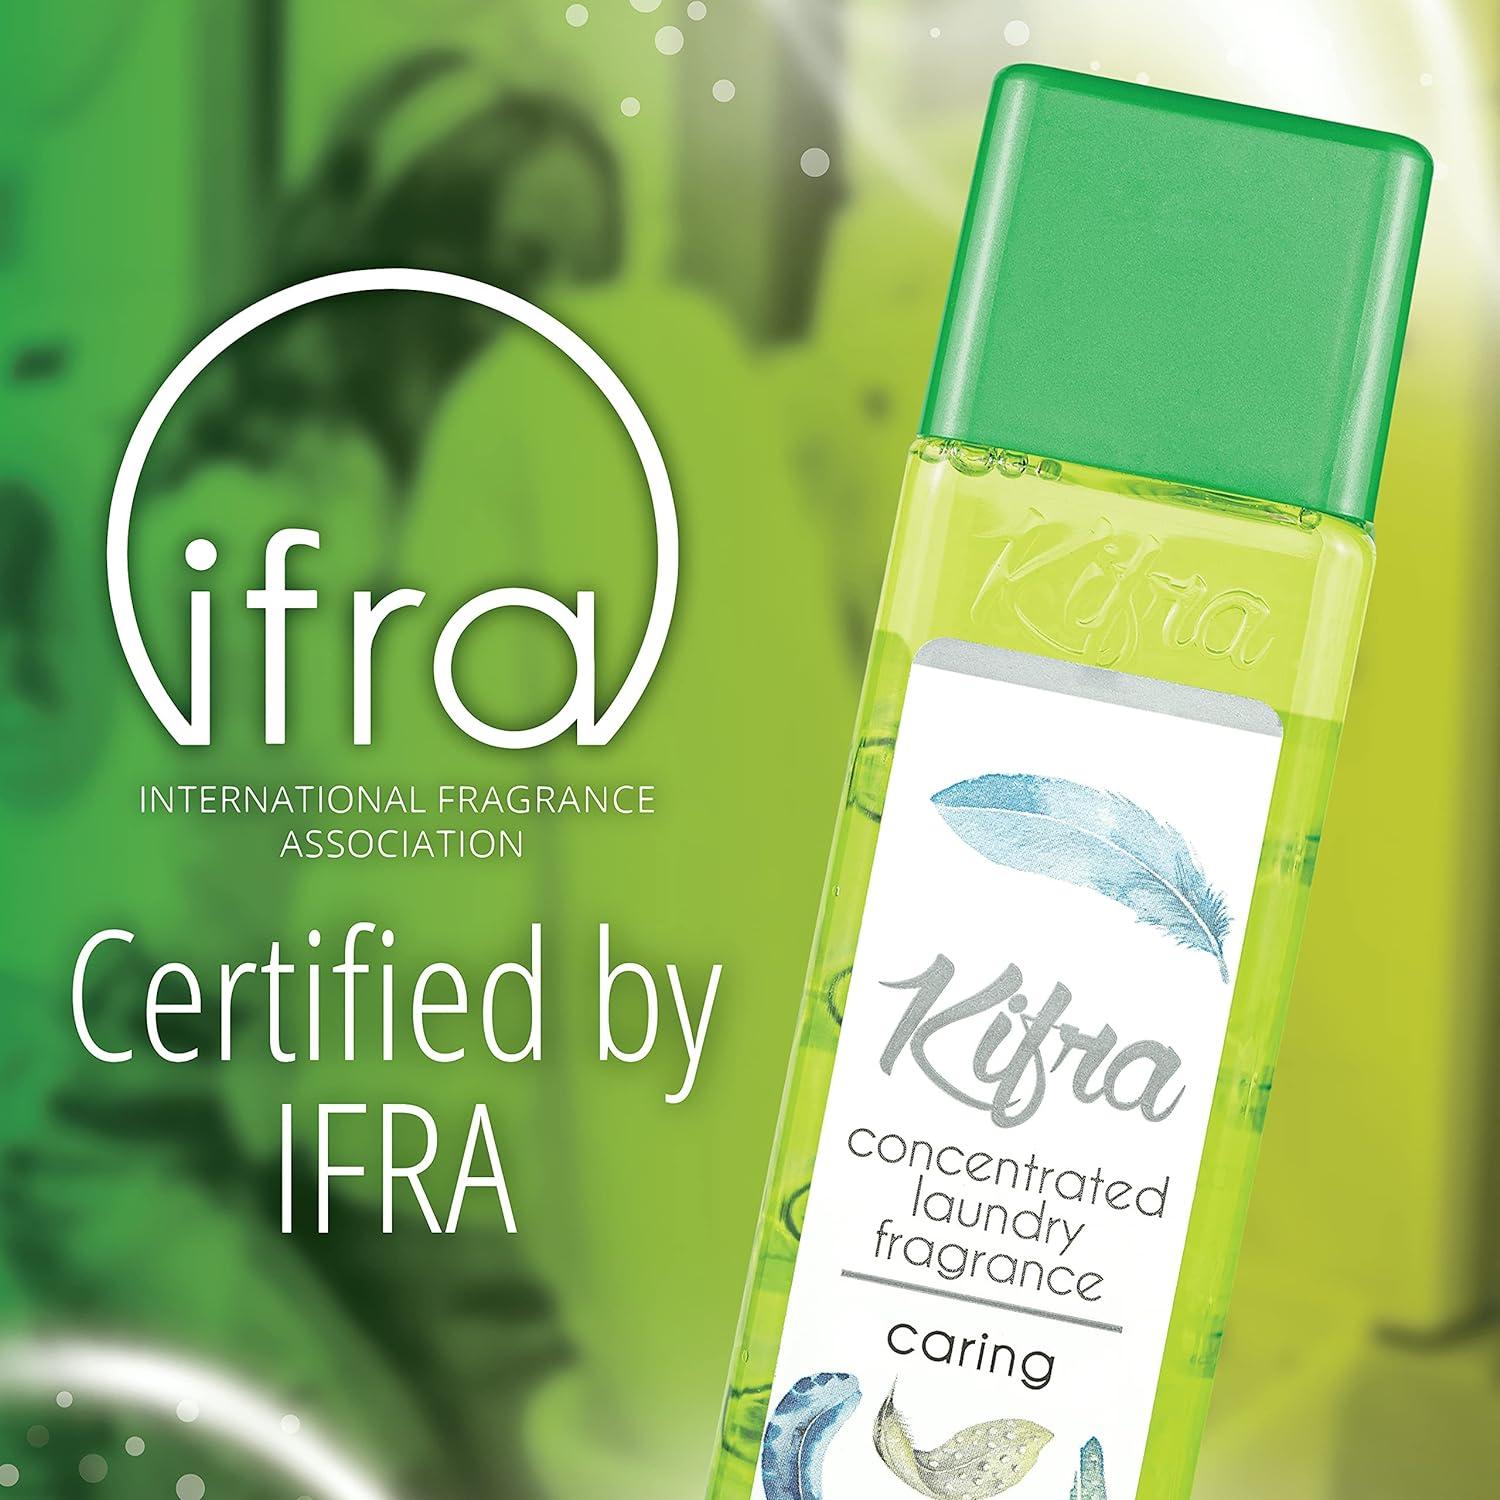 KIFRA CARING Concentrated Laundry Fragrance 200ml 80 Washing Cycles